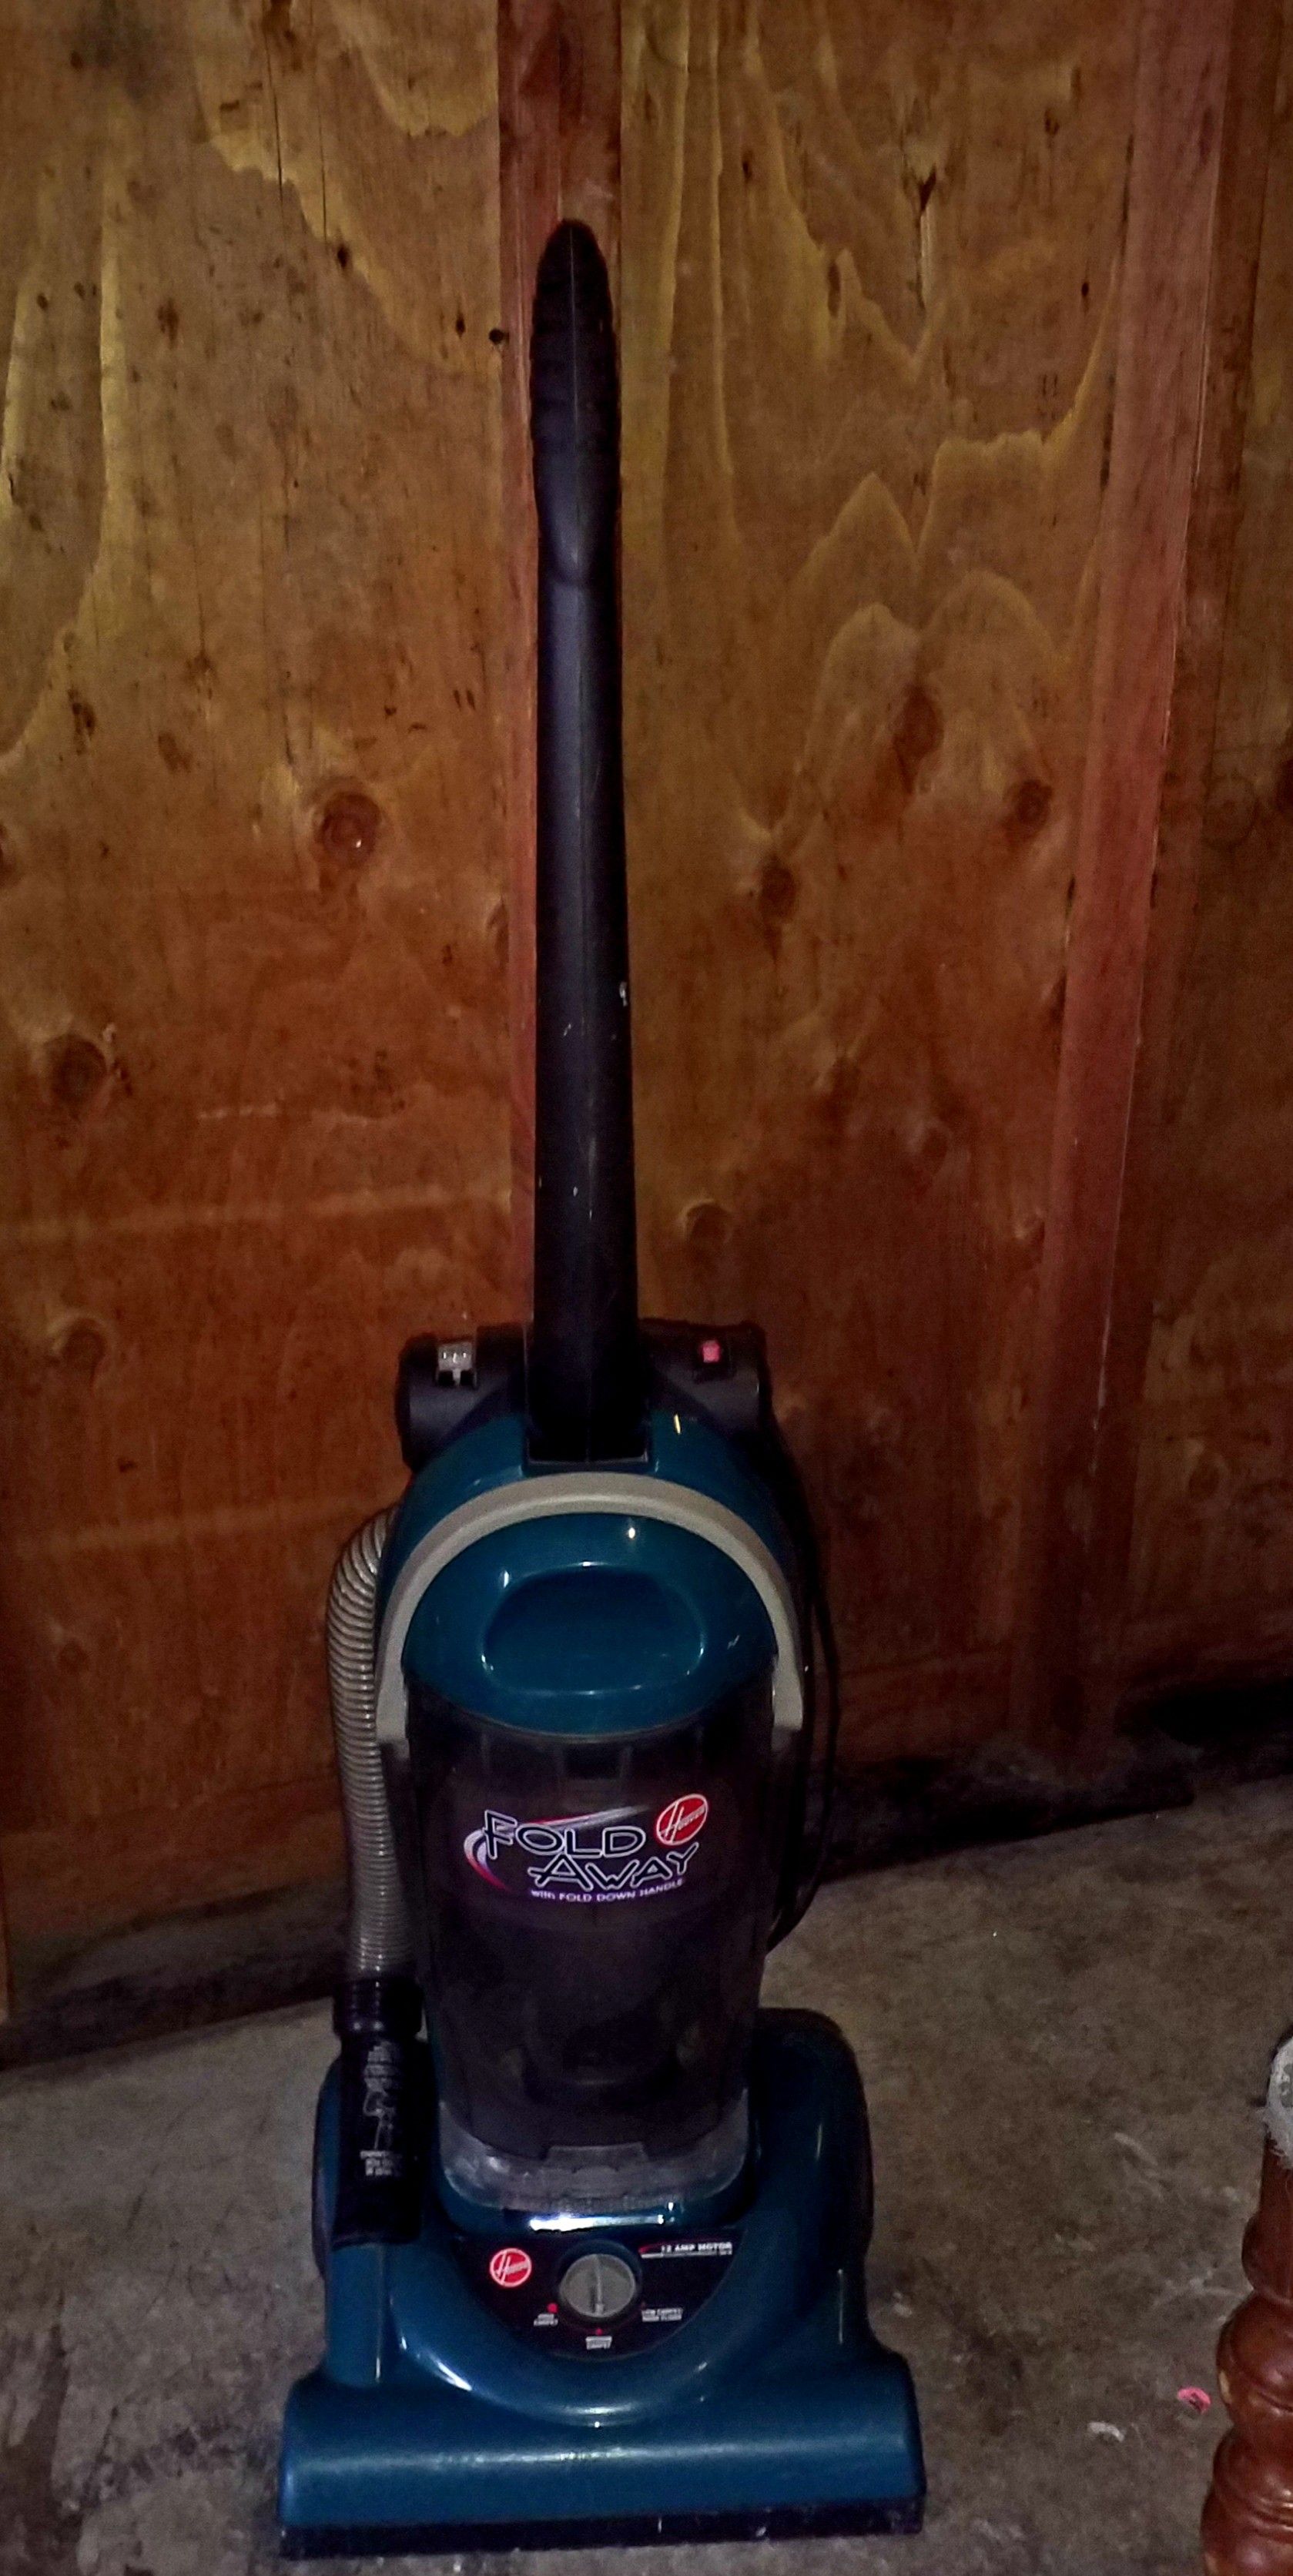 Hoover bagless upright vacuum cleaner with fold down handle for easy storage, $10 OBO